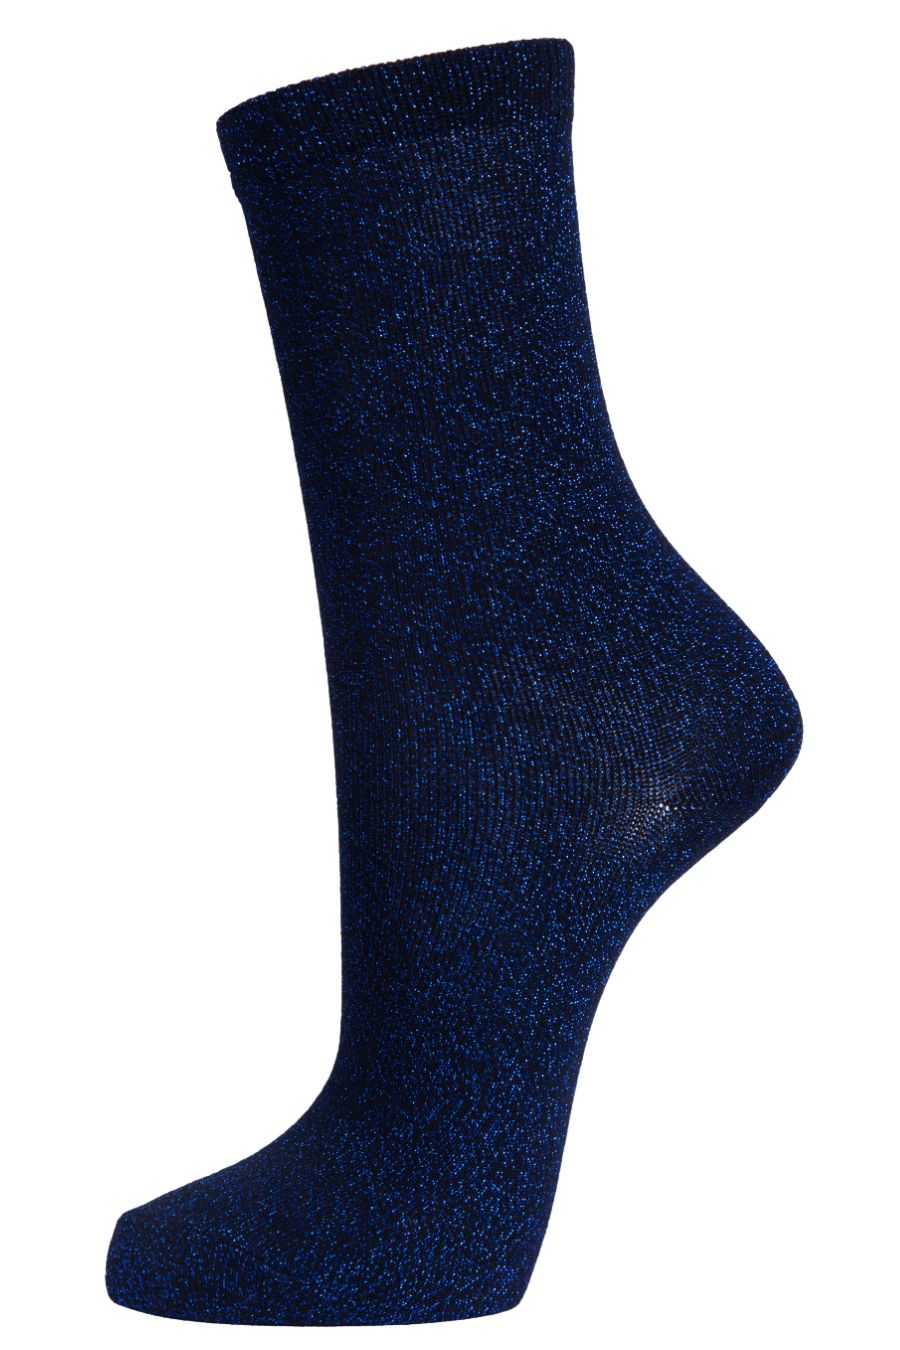 boue ankle socks with an all over royal blue glitter sparkle